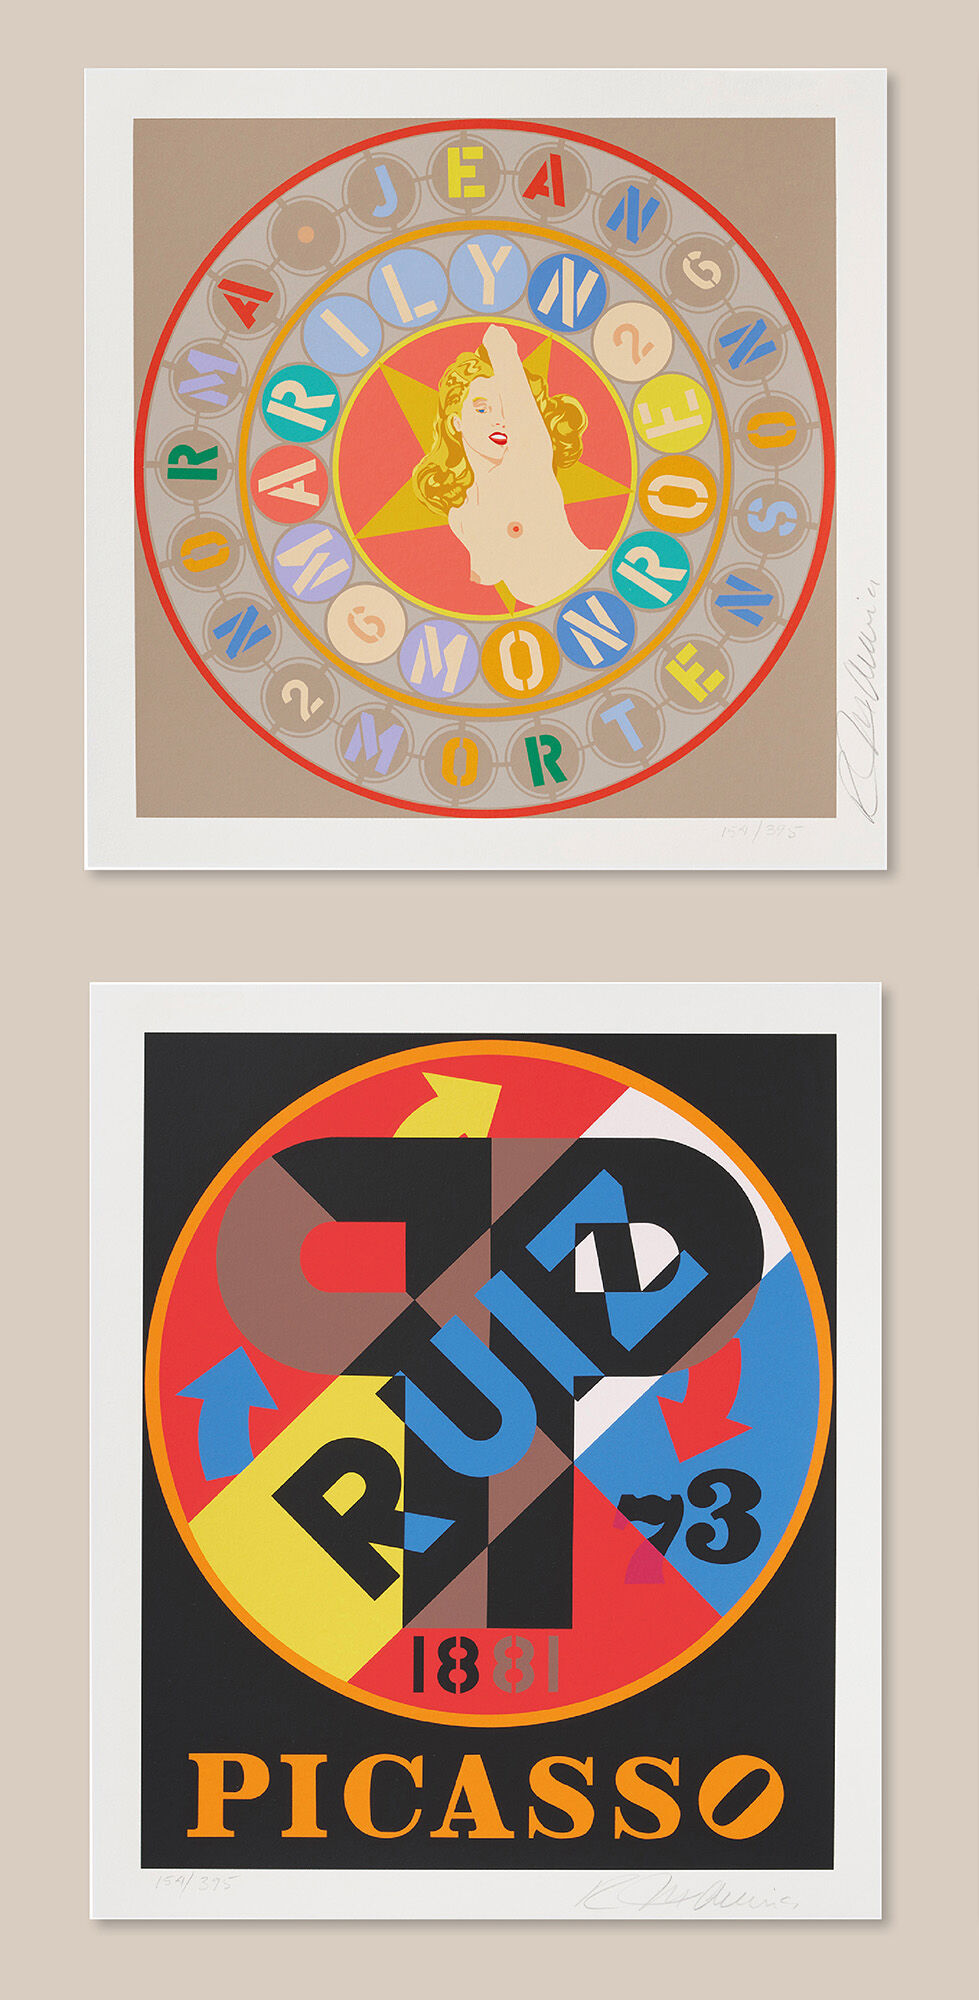 Picture "The American Dream" (1997), Portfolio by Robert Indiana